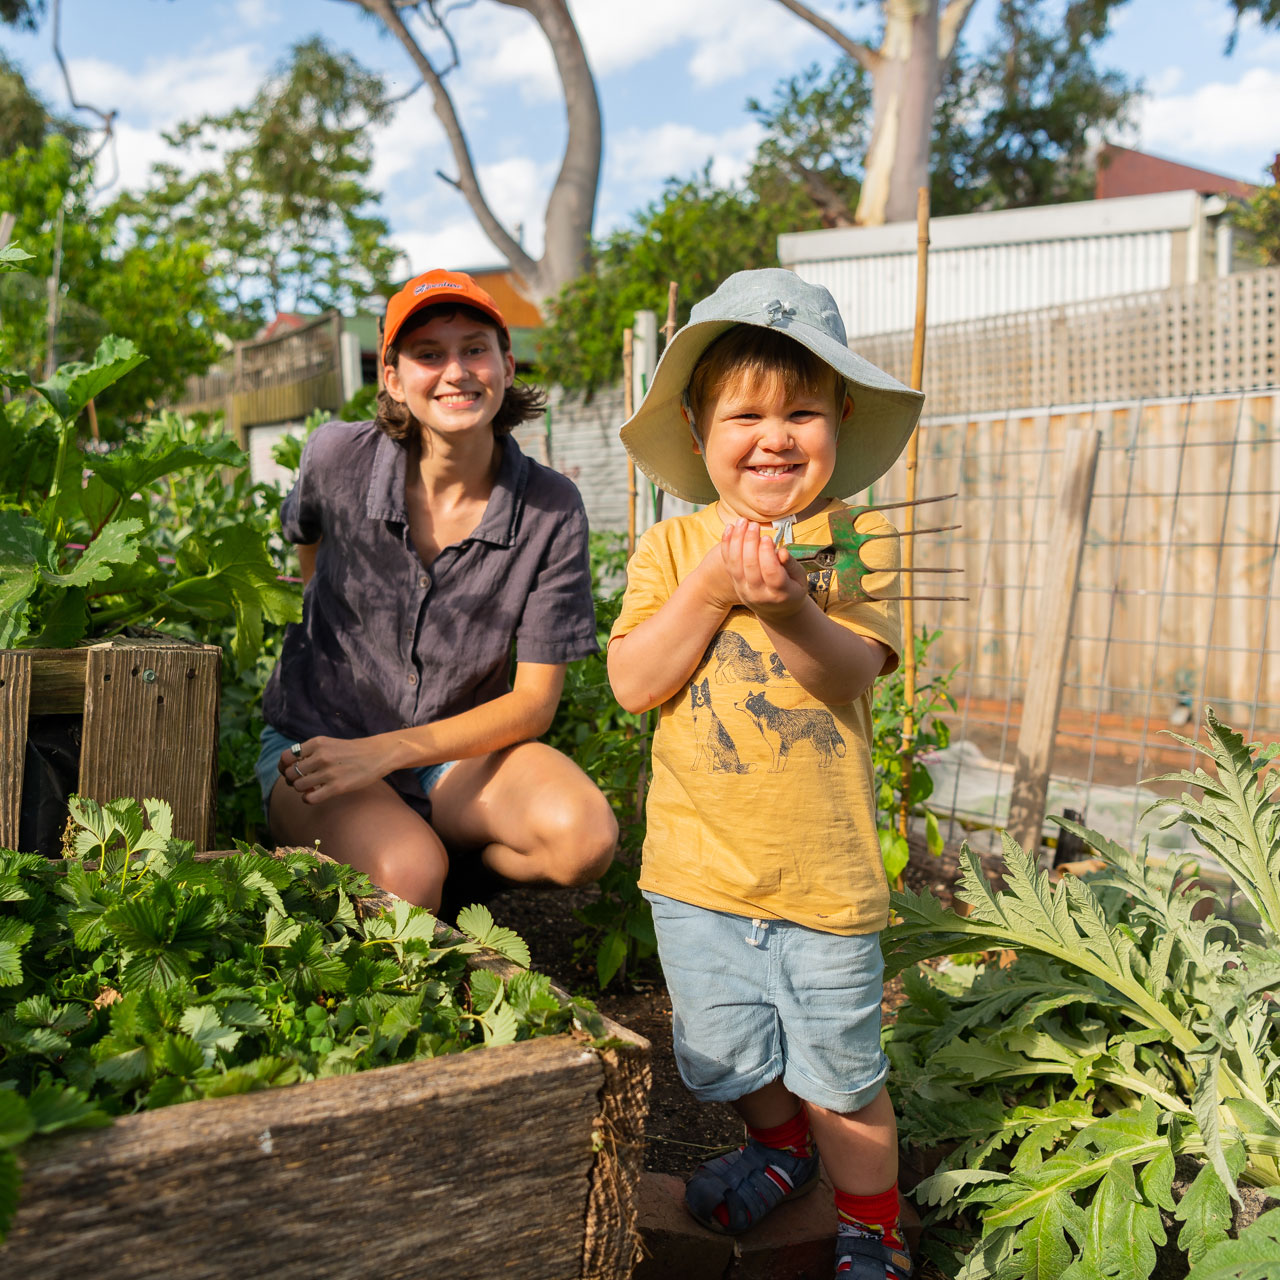 Image of a child holding a trowel and a younger person in a vegetable garden